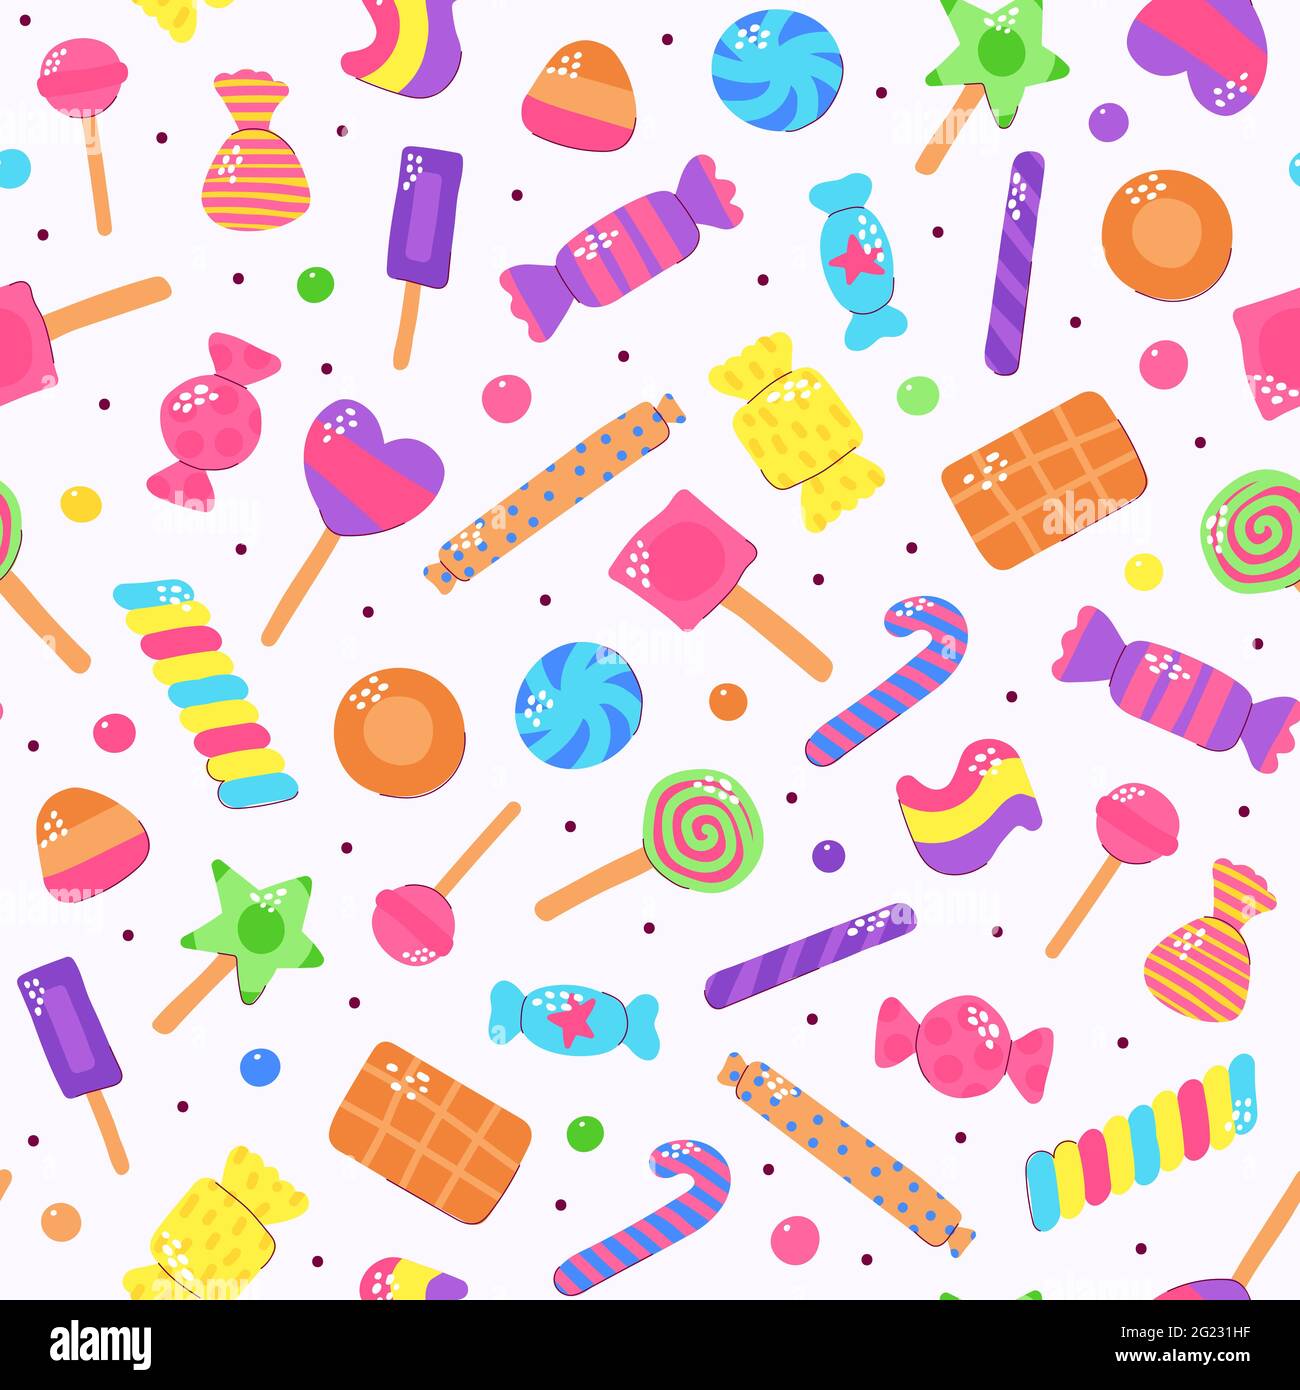 Cute multicolored candy set. Sugar Sweets on light background. Gummy, Chocolate, Caramel, Lollipops, Jelly, Peppermint, Marmalade, Drops of different Stock Vector